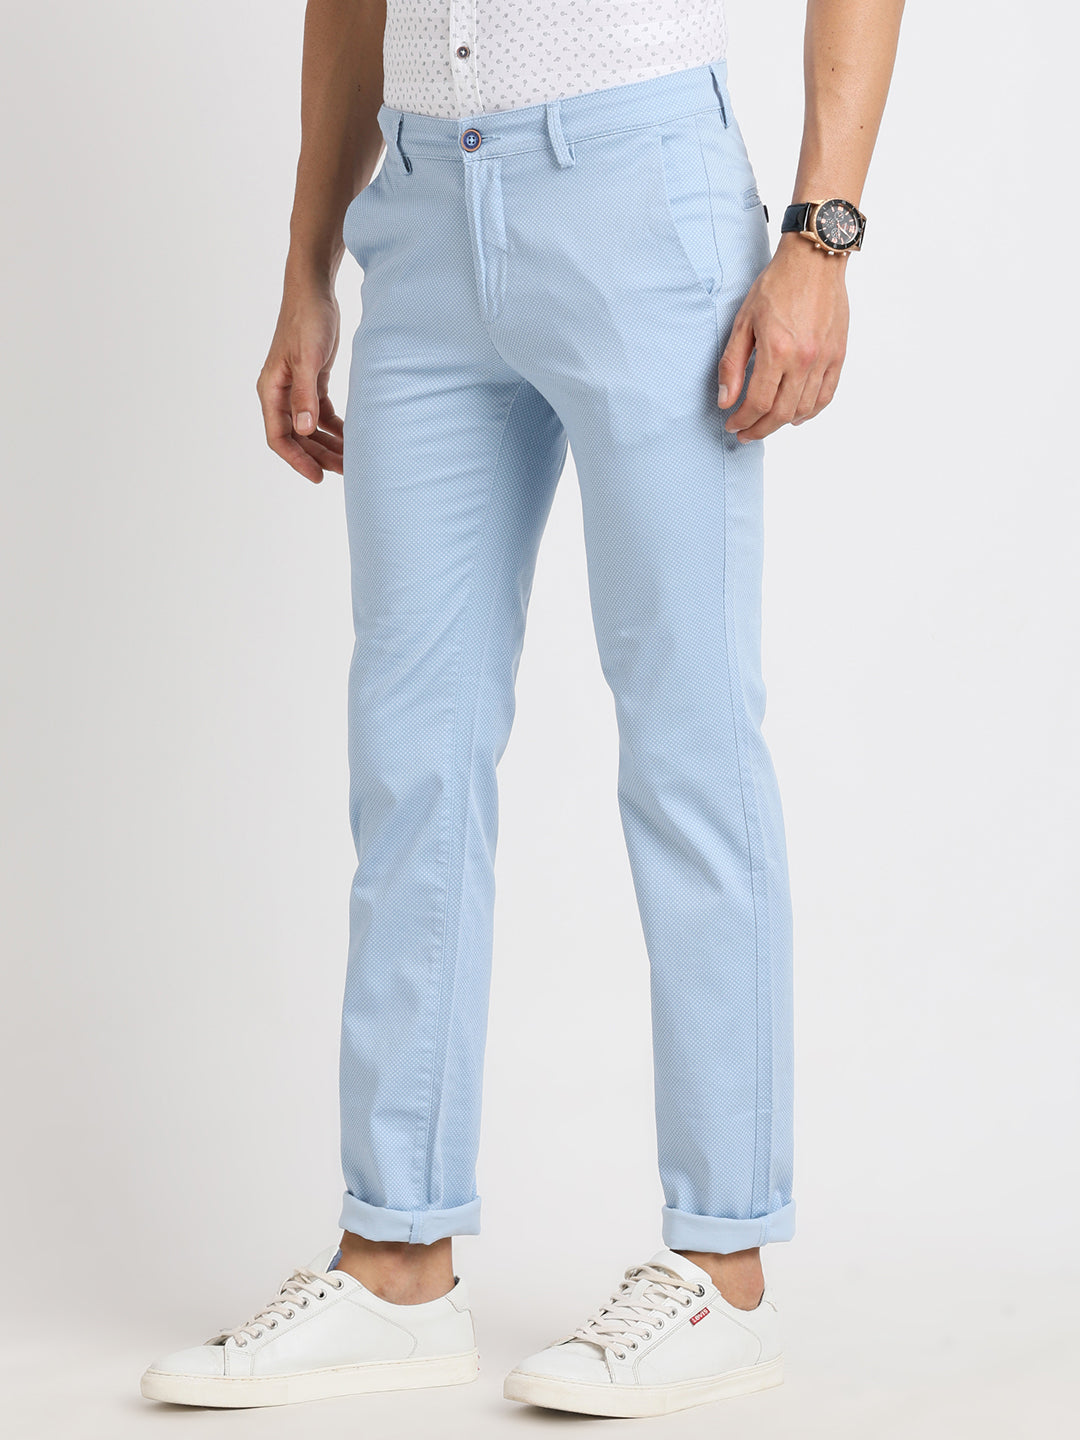 Cotton Stretch Sky Blue Printed Ultra Slim Fit Flat Front Casual Trouser